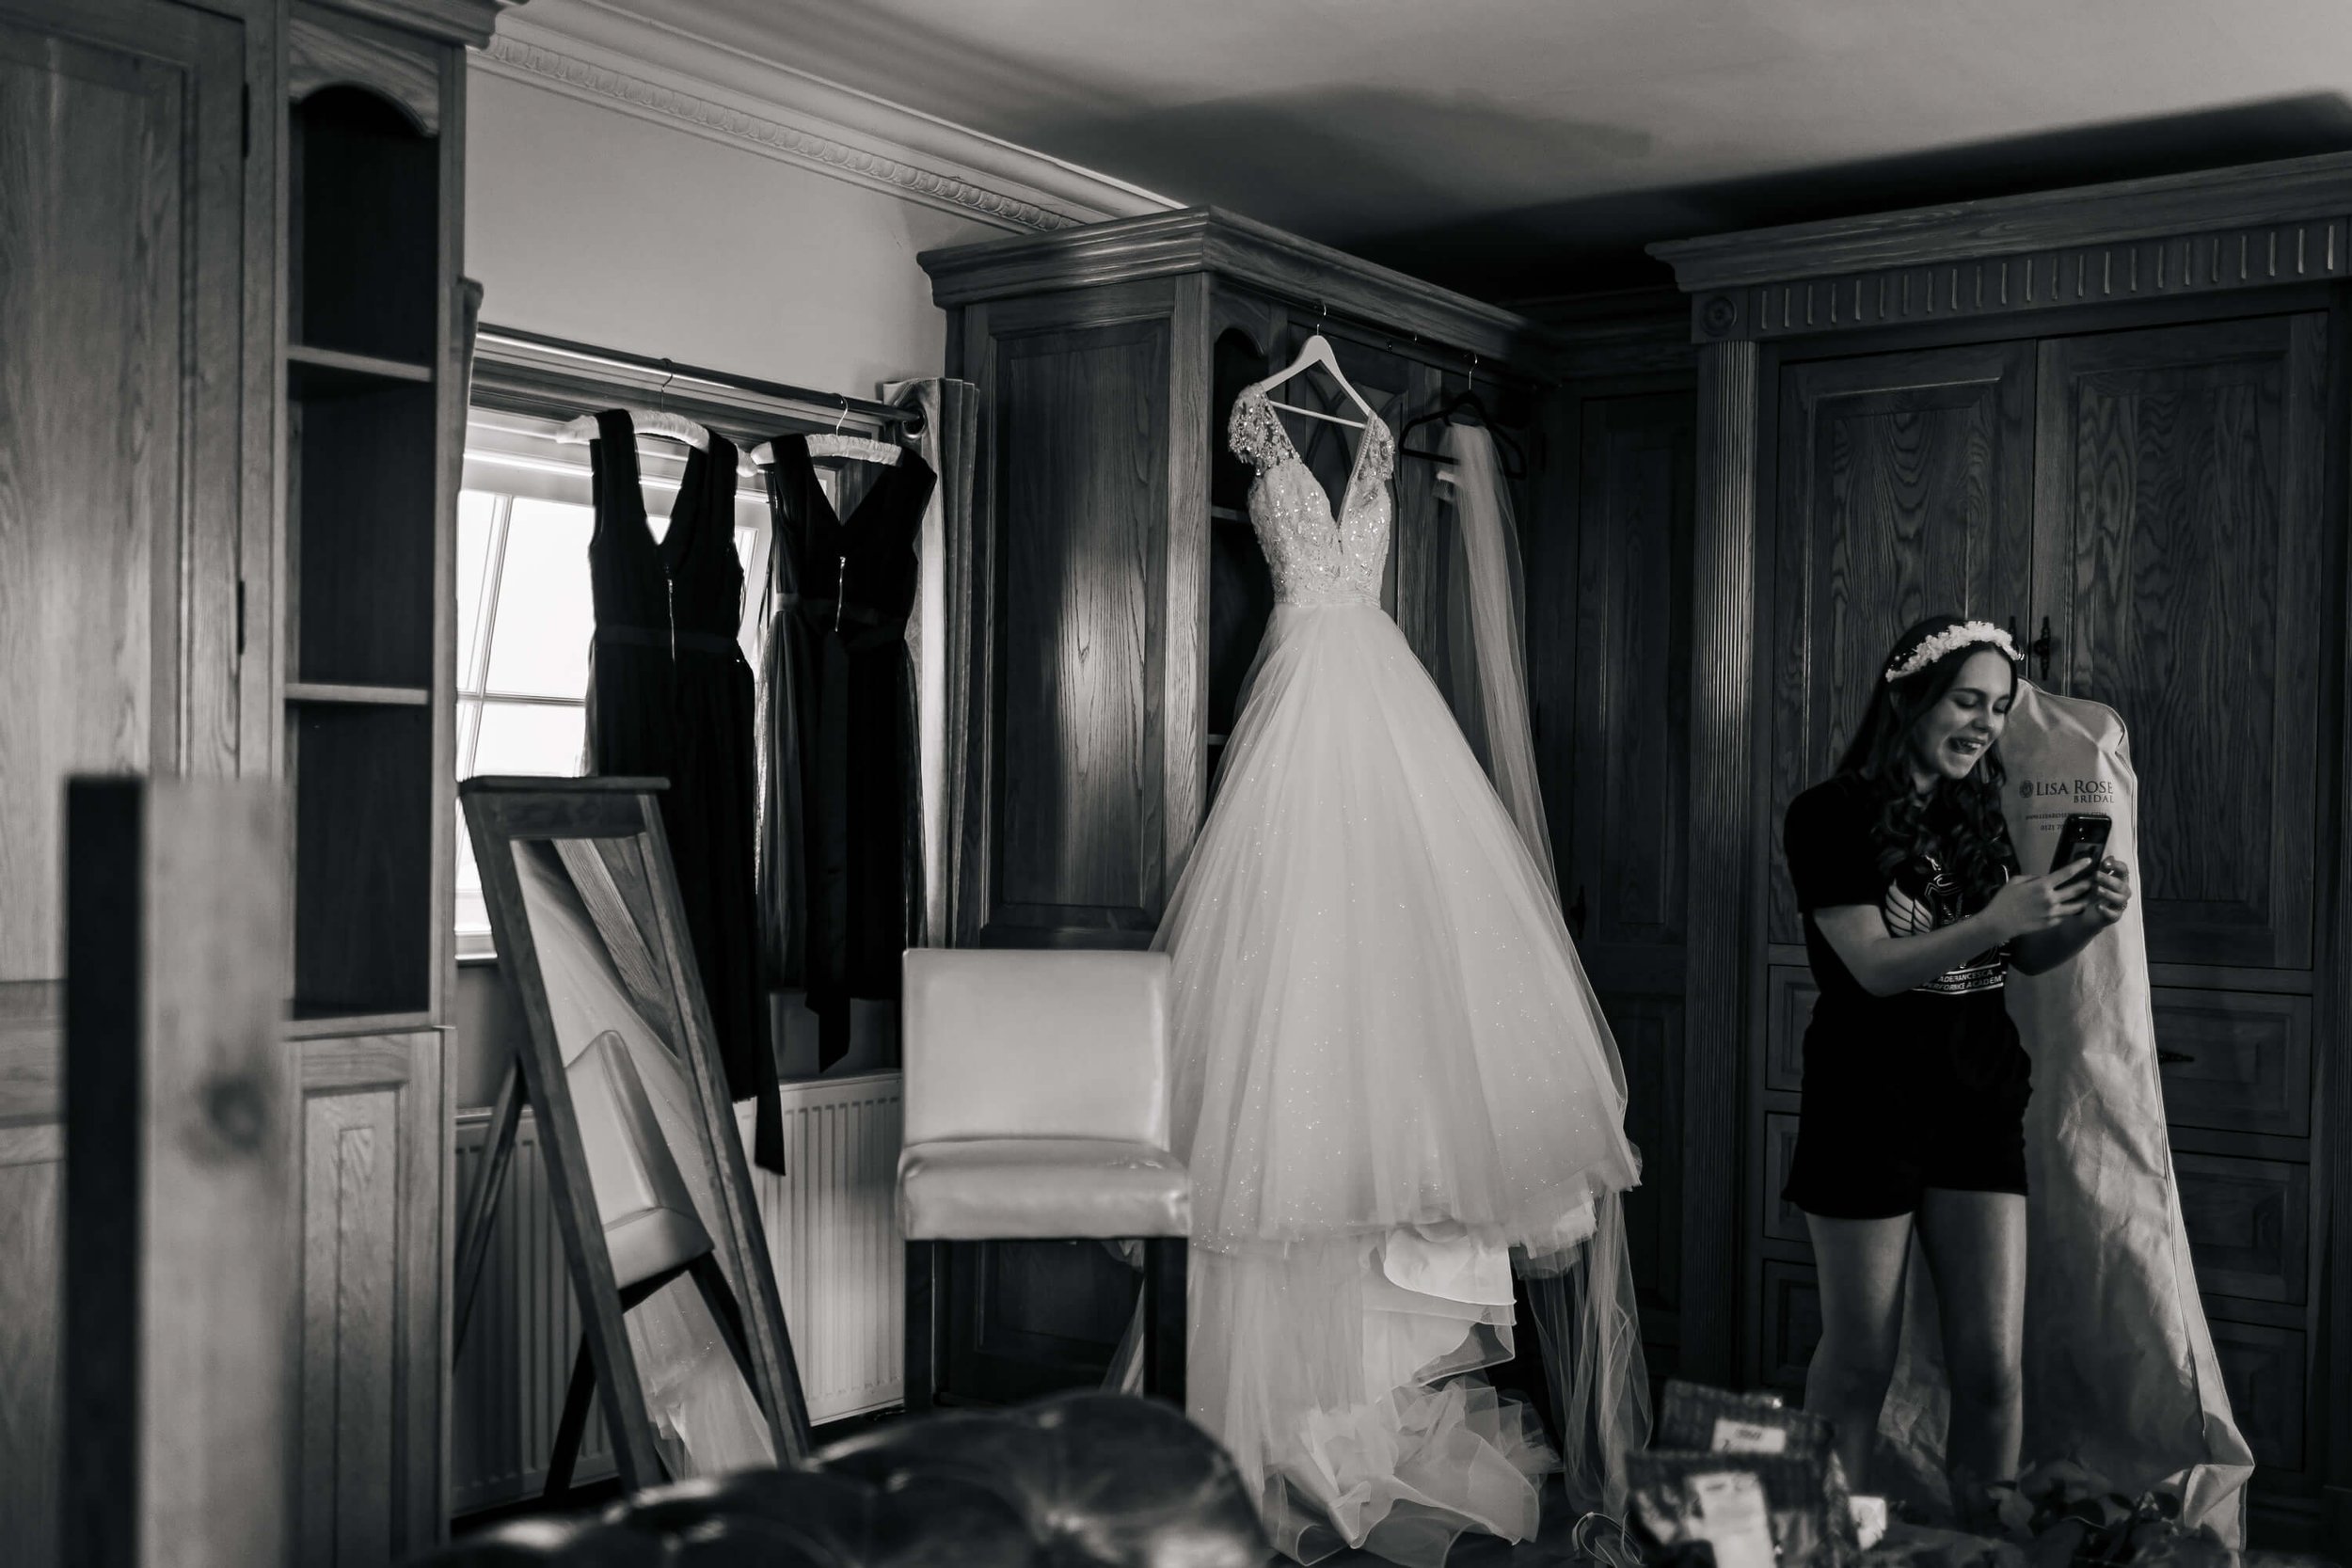 The bride's wedding dress hanging up on the wardrobe